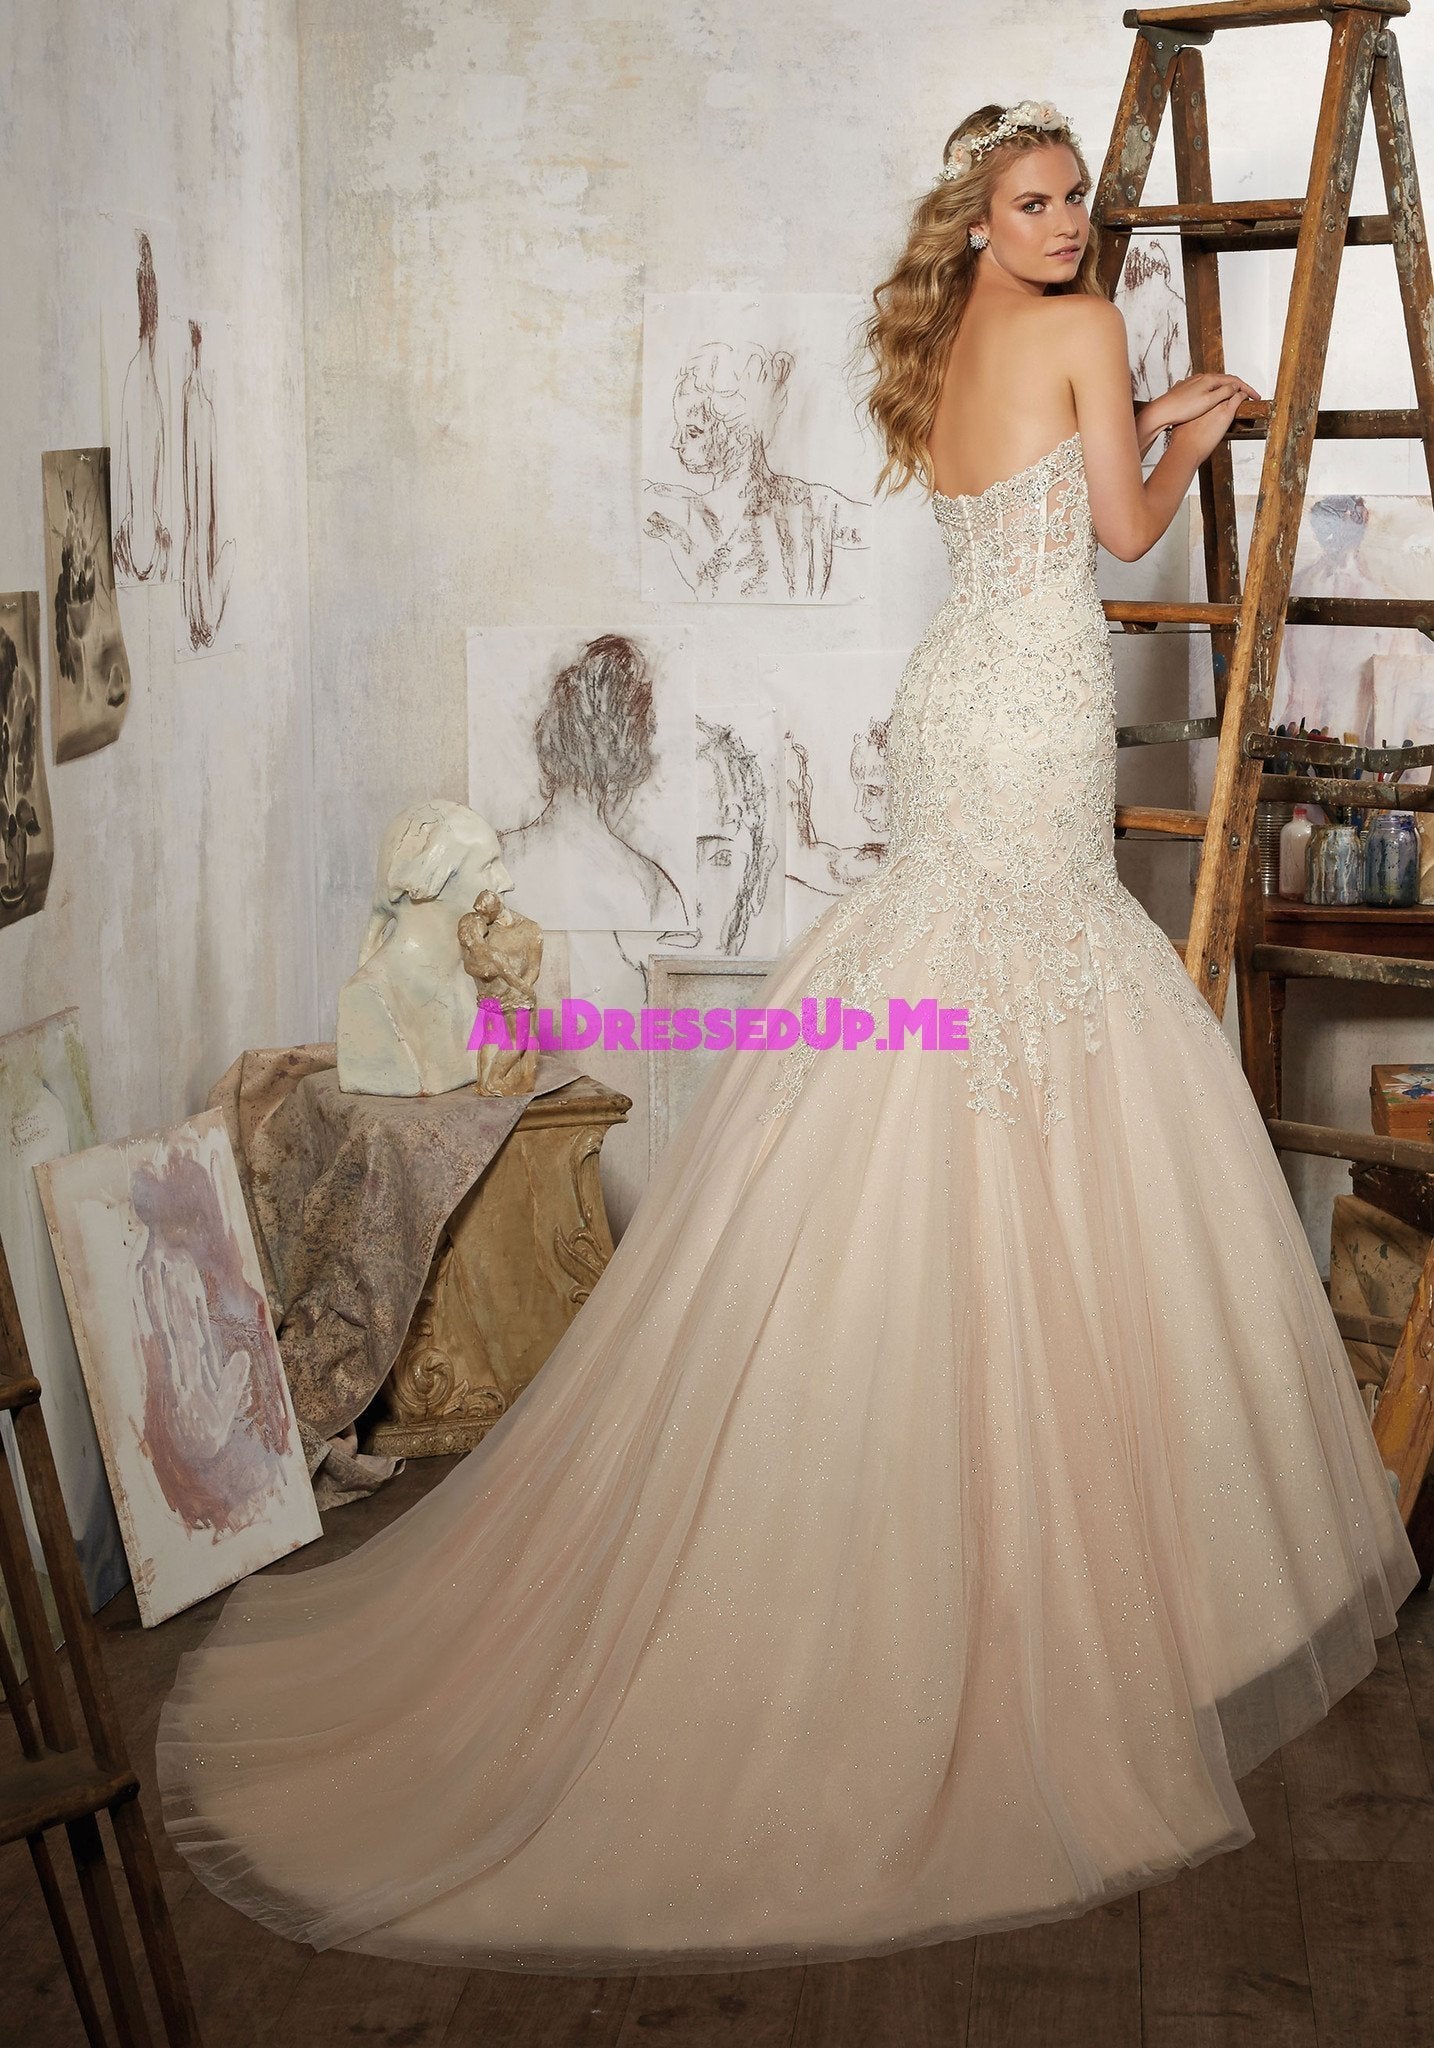 Morilee - Mariela - 8125 - Cheron's Bridal, Wedding Gown - Morilee Line - - Wedding Gowns Dresses Chattanooga Hixson Shops Boutiques Tennessee TN Georgia GA MSRP Lowest Prices Sale Discount